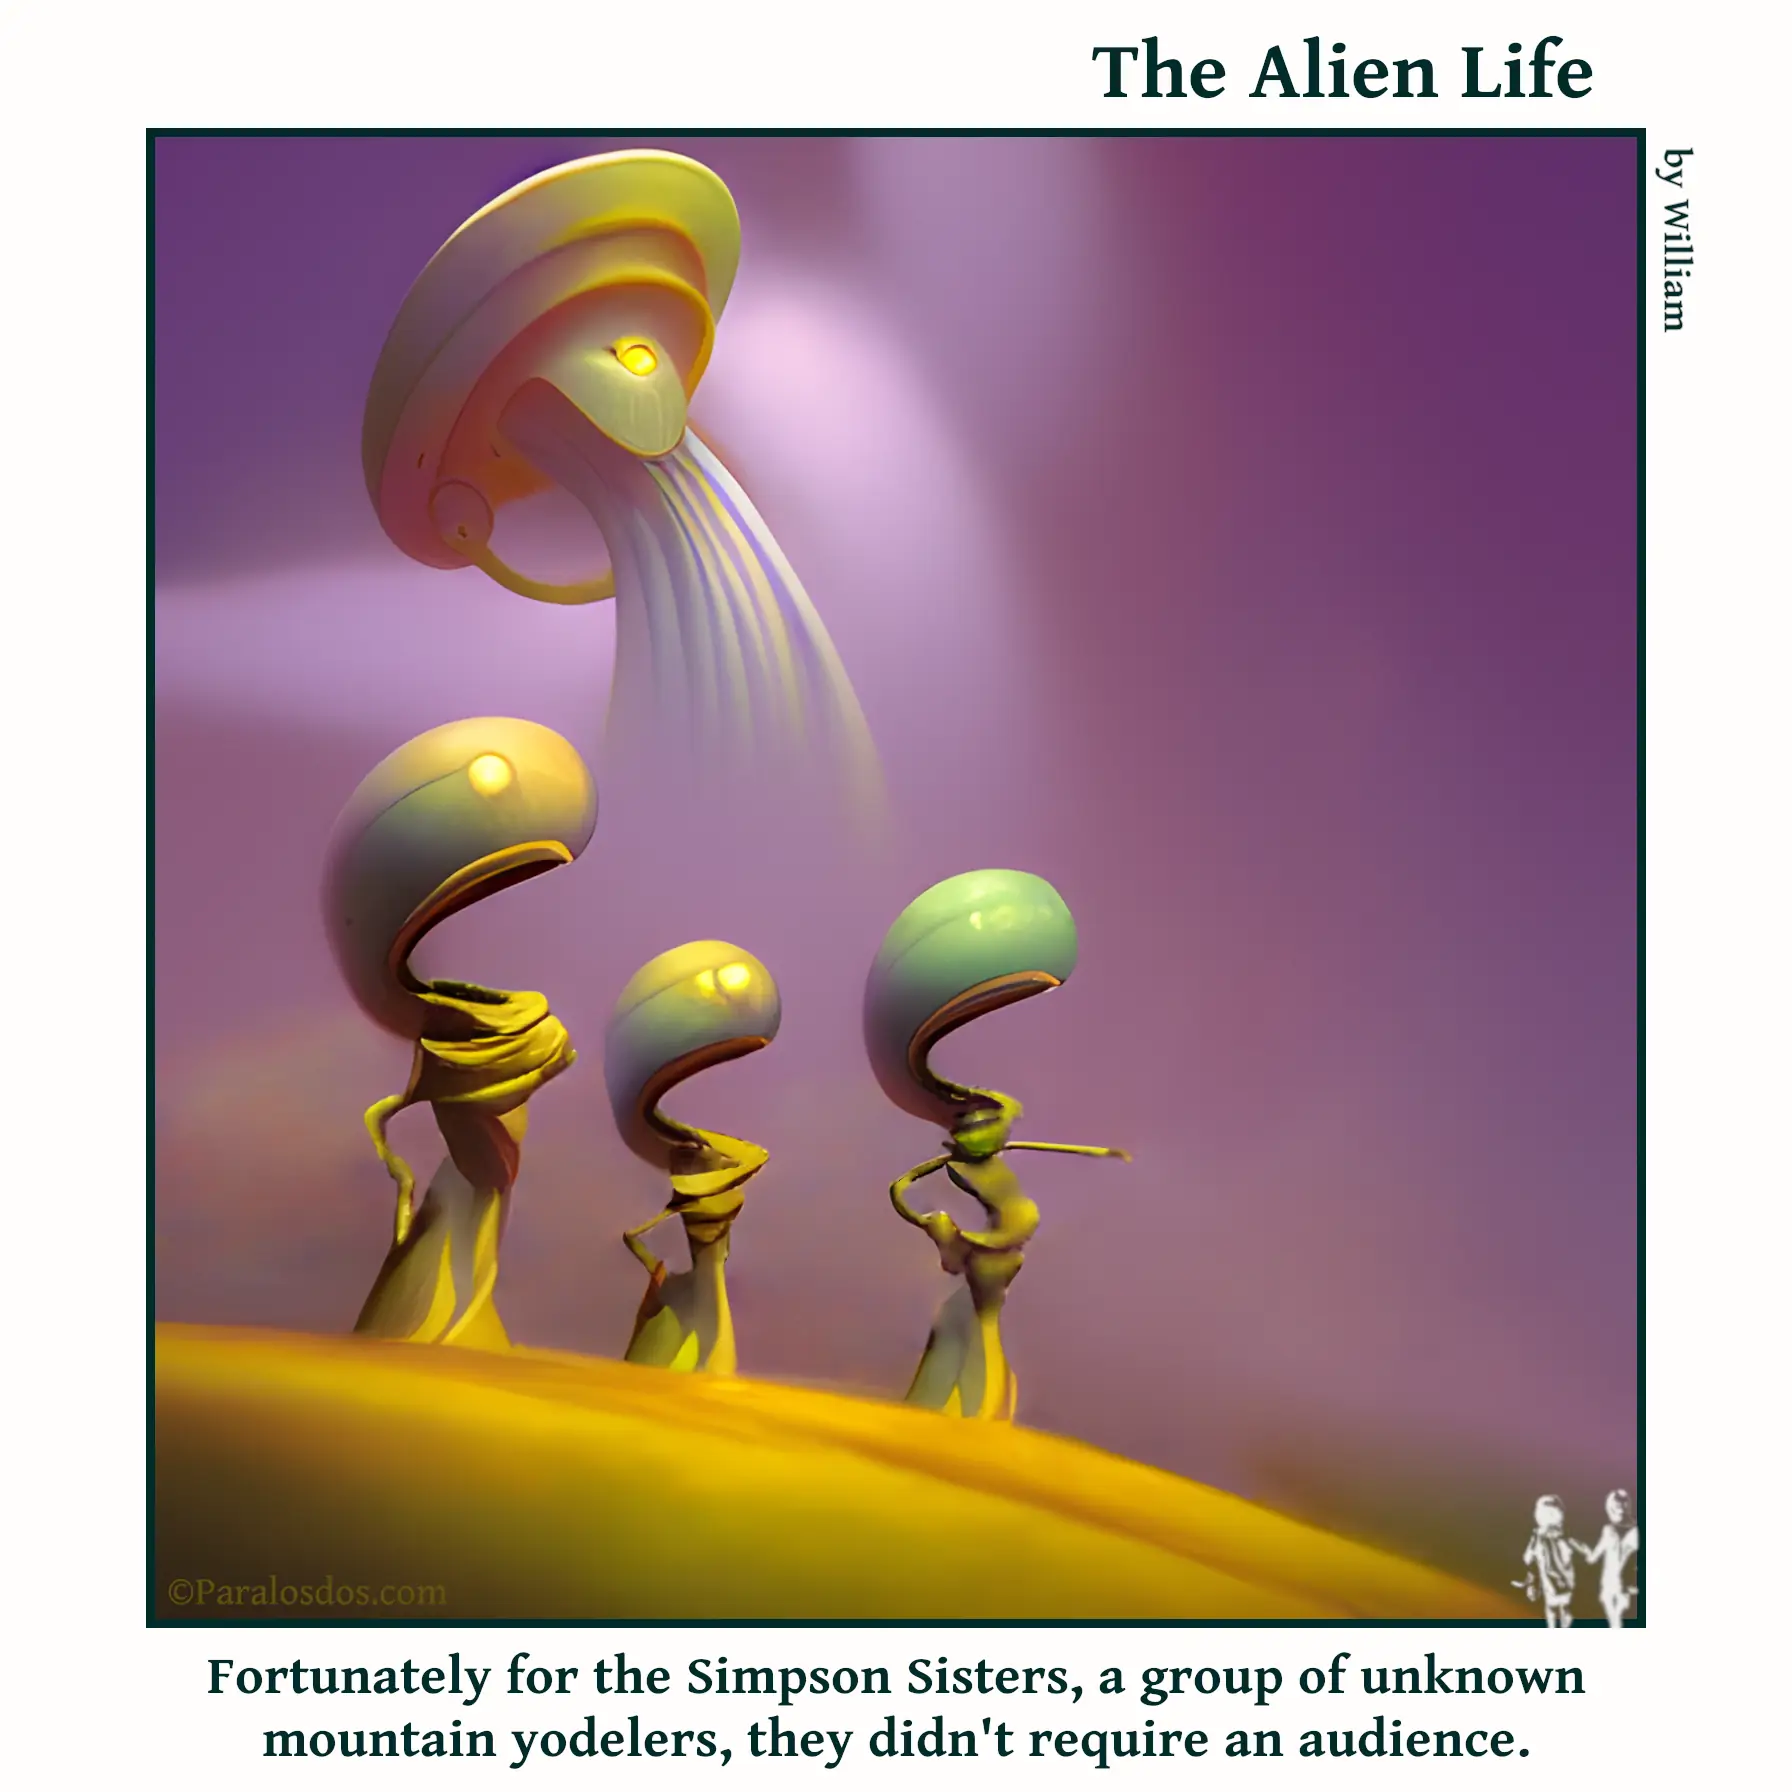 The Alien Life, one panel Comic. Three aliens are posed in a singing fashion on a hillside. The caption reads: Fortunately for the Simpson Sisters, a group of unknown mountain yodelers, they didn't require an audience.